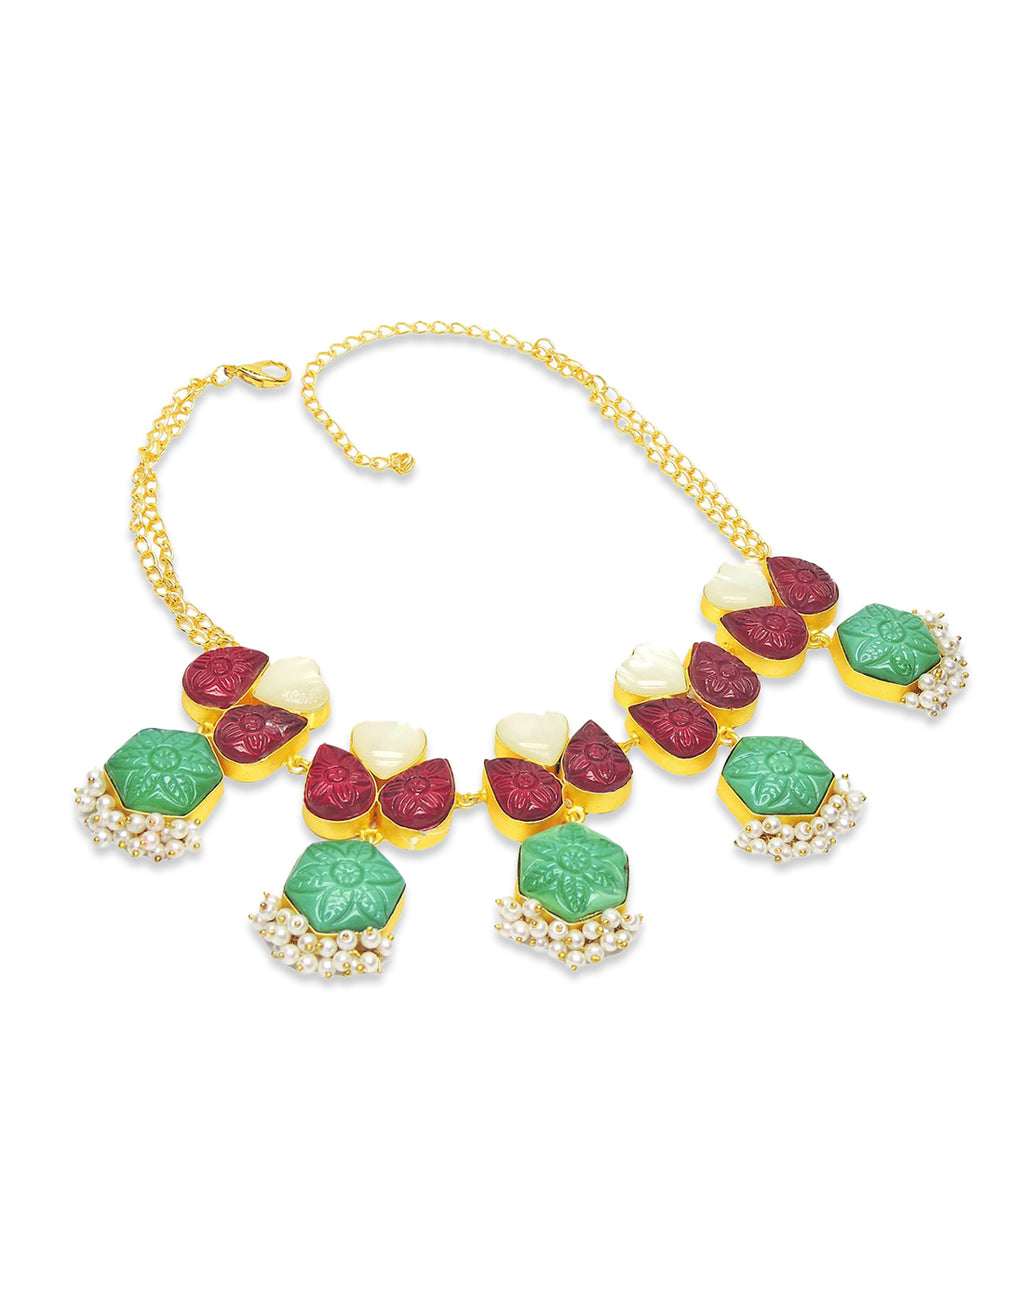 Aaliyah Necklace - Necklaces - Handcrafted Jewellery - Made in India - Dubai Jewellery, Fashion & Lifestyle - Dori